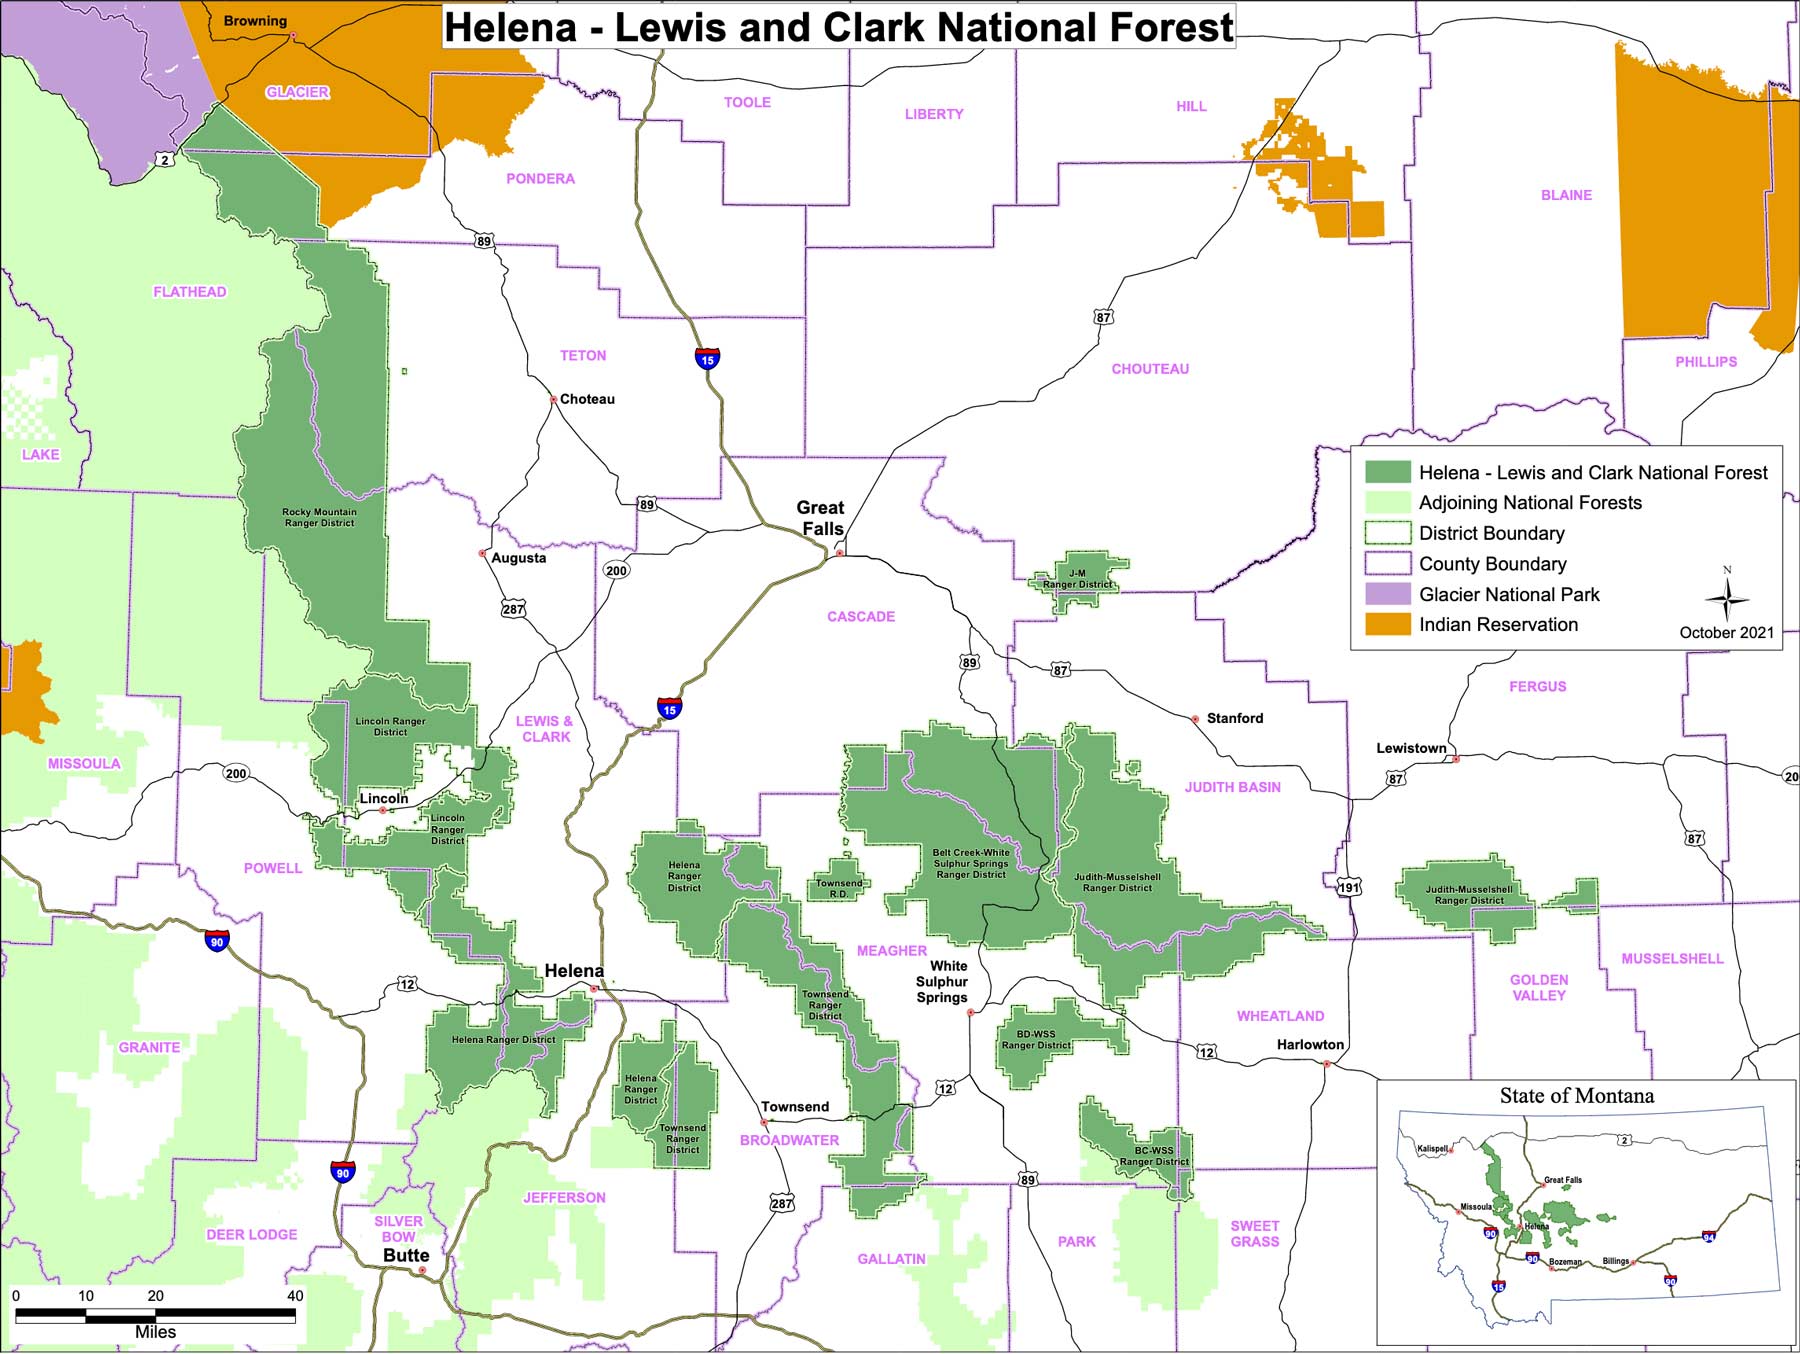 helena-lewis & clark national forest ranger districts map